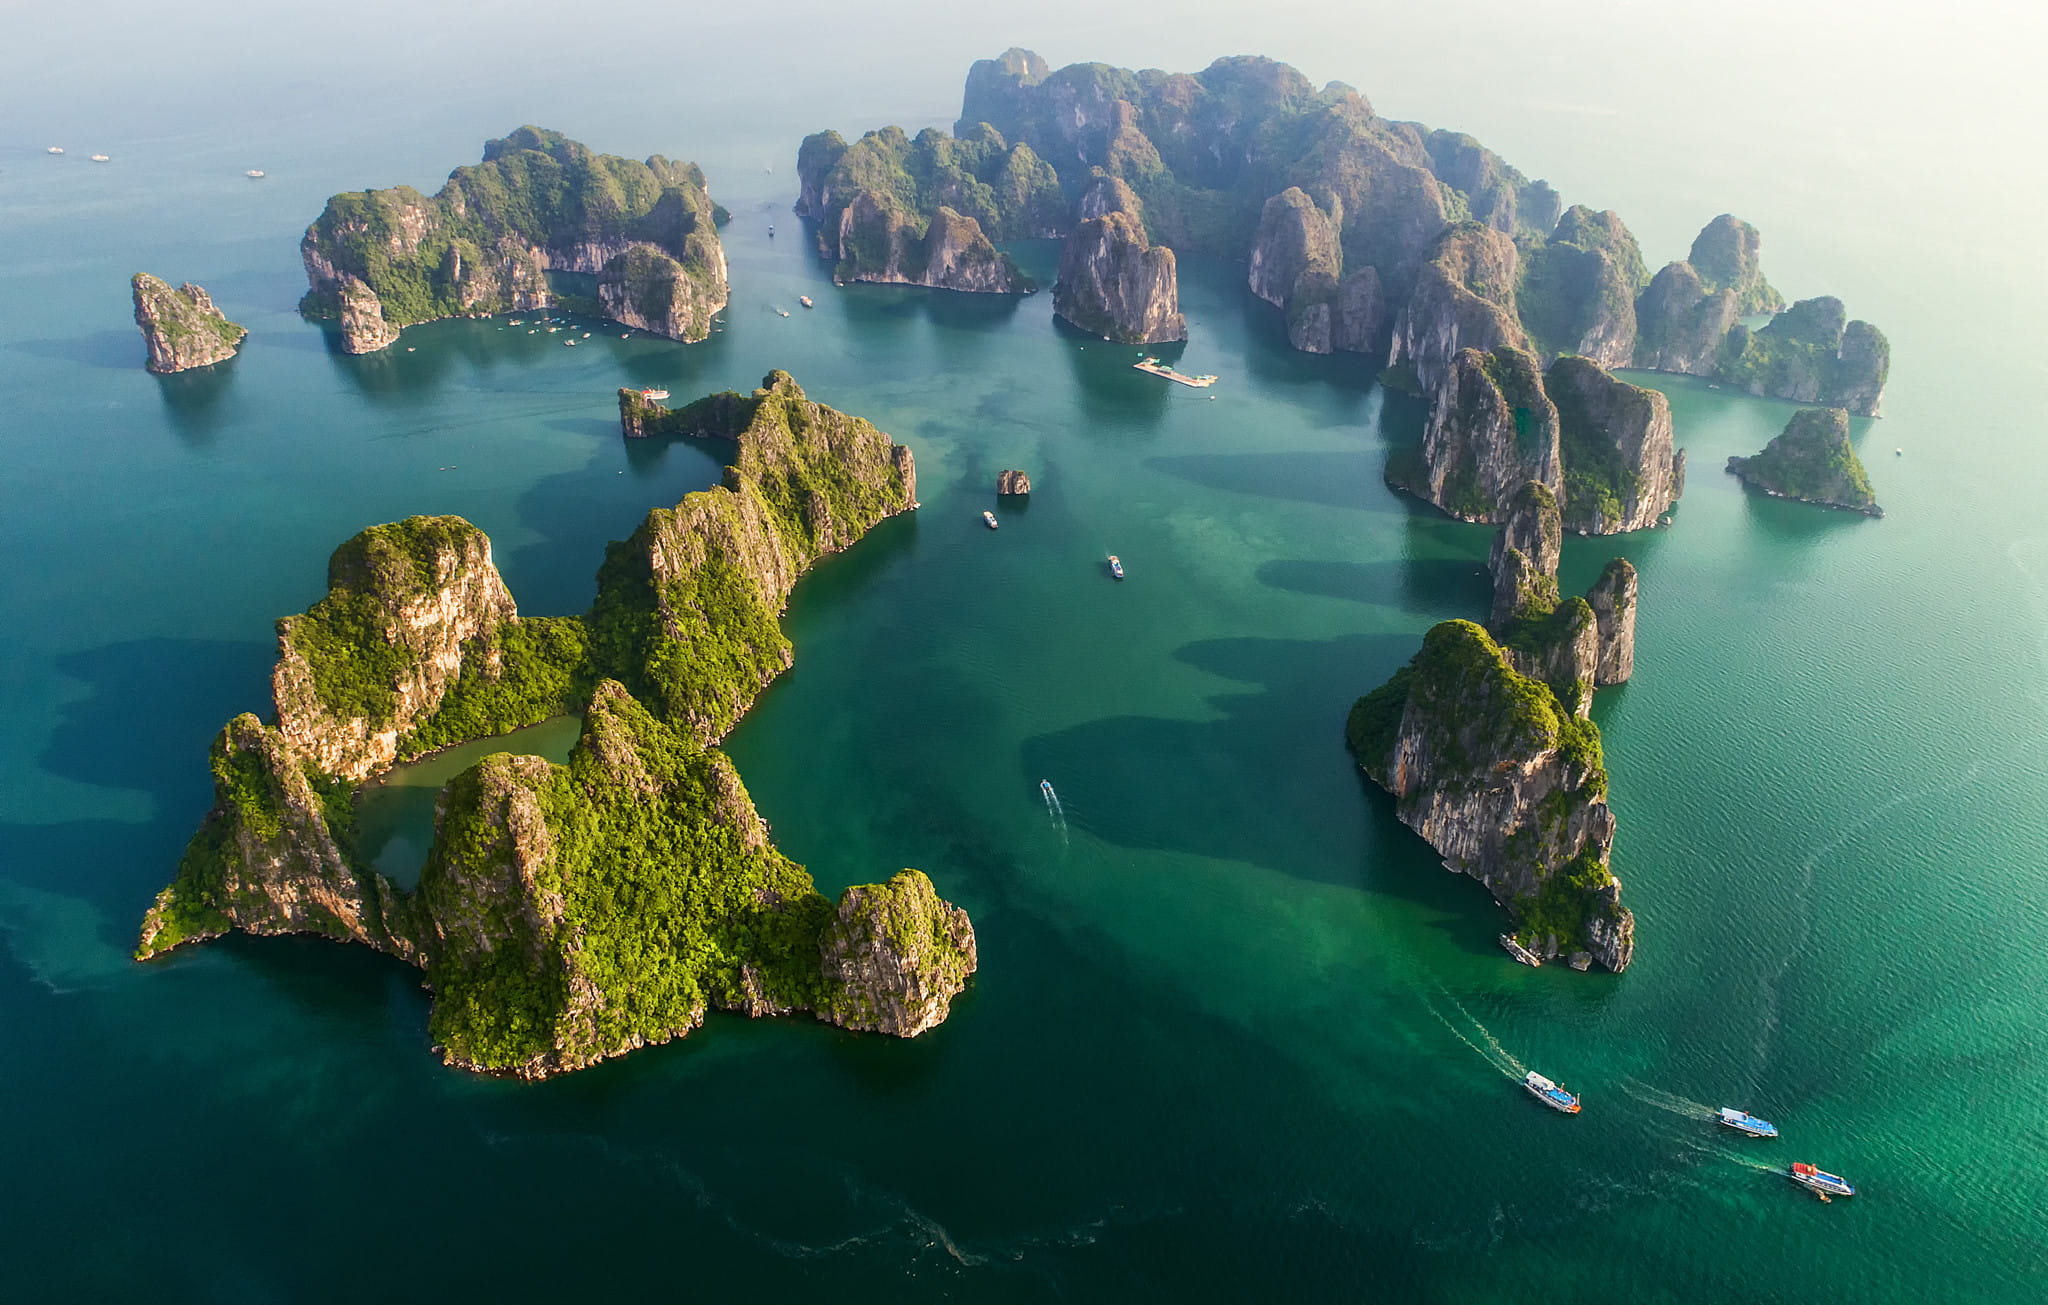 Halong Bay One Of The Most Beautiful Bays In The World Jptraveltime 